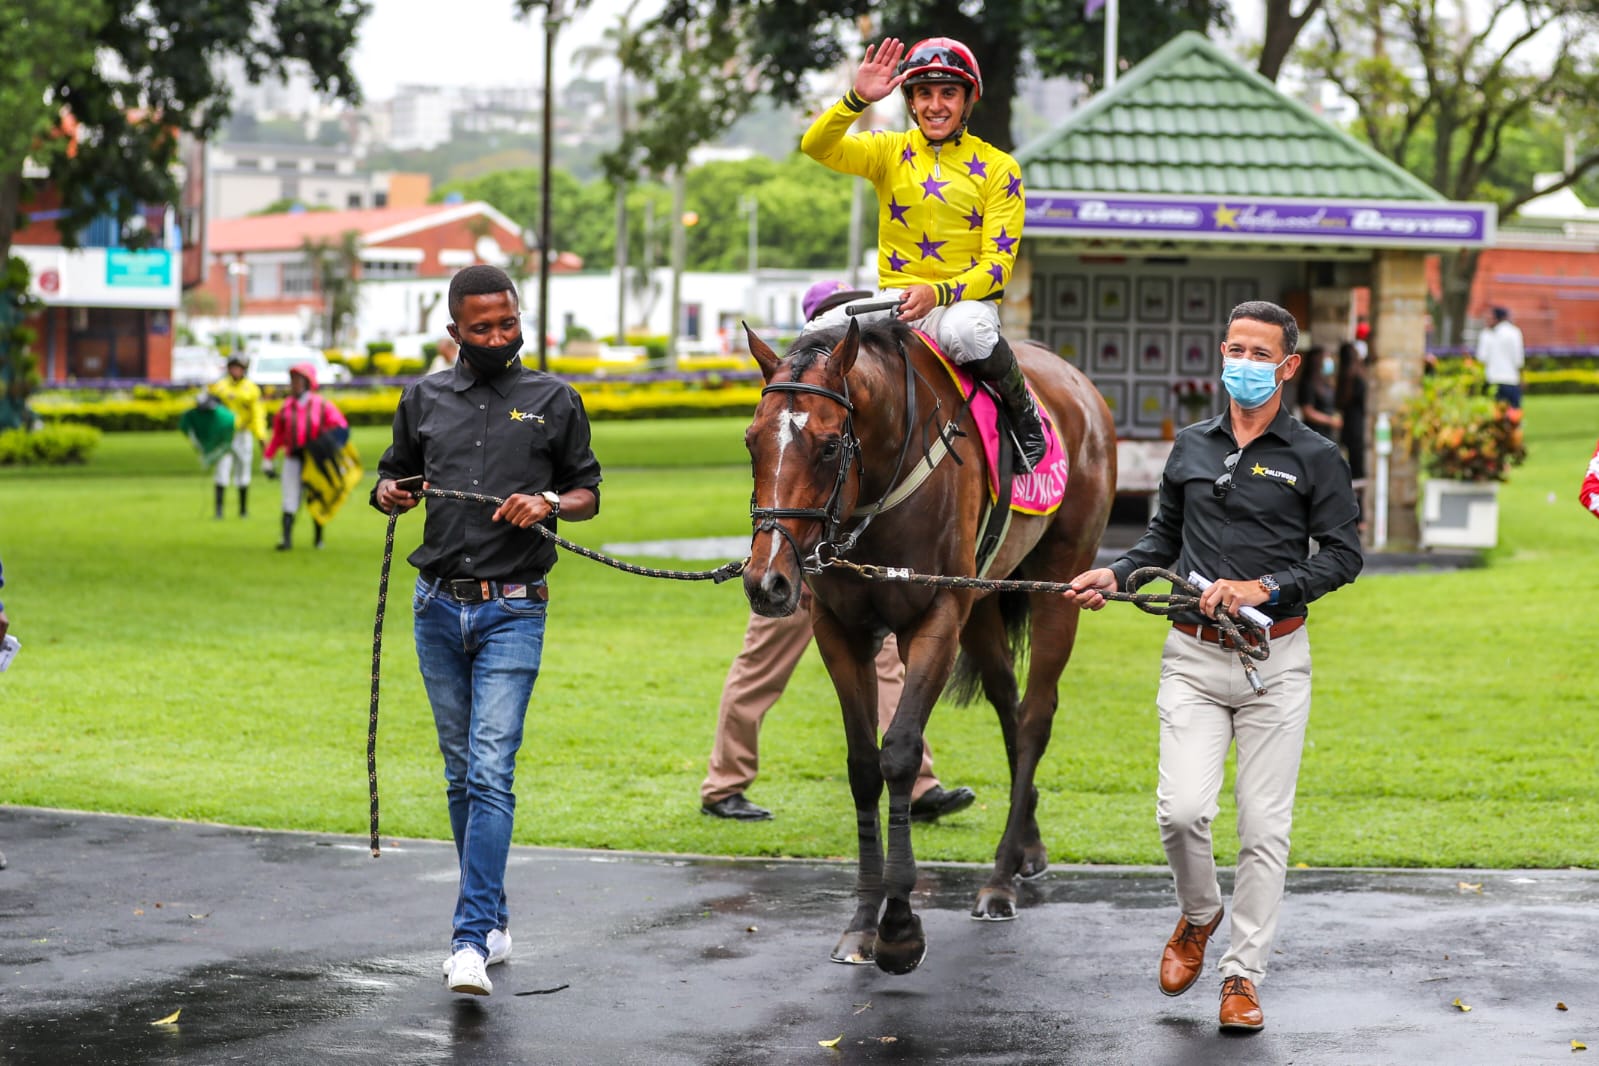 20220214 - PURPLE POWAHOUSE winning at Hollywoodbets Greyville Polytrack - Lead IN